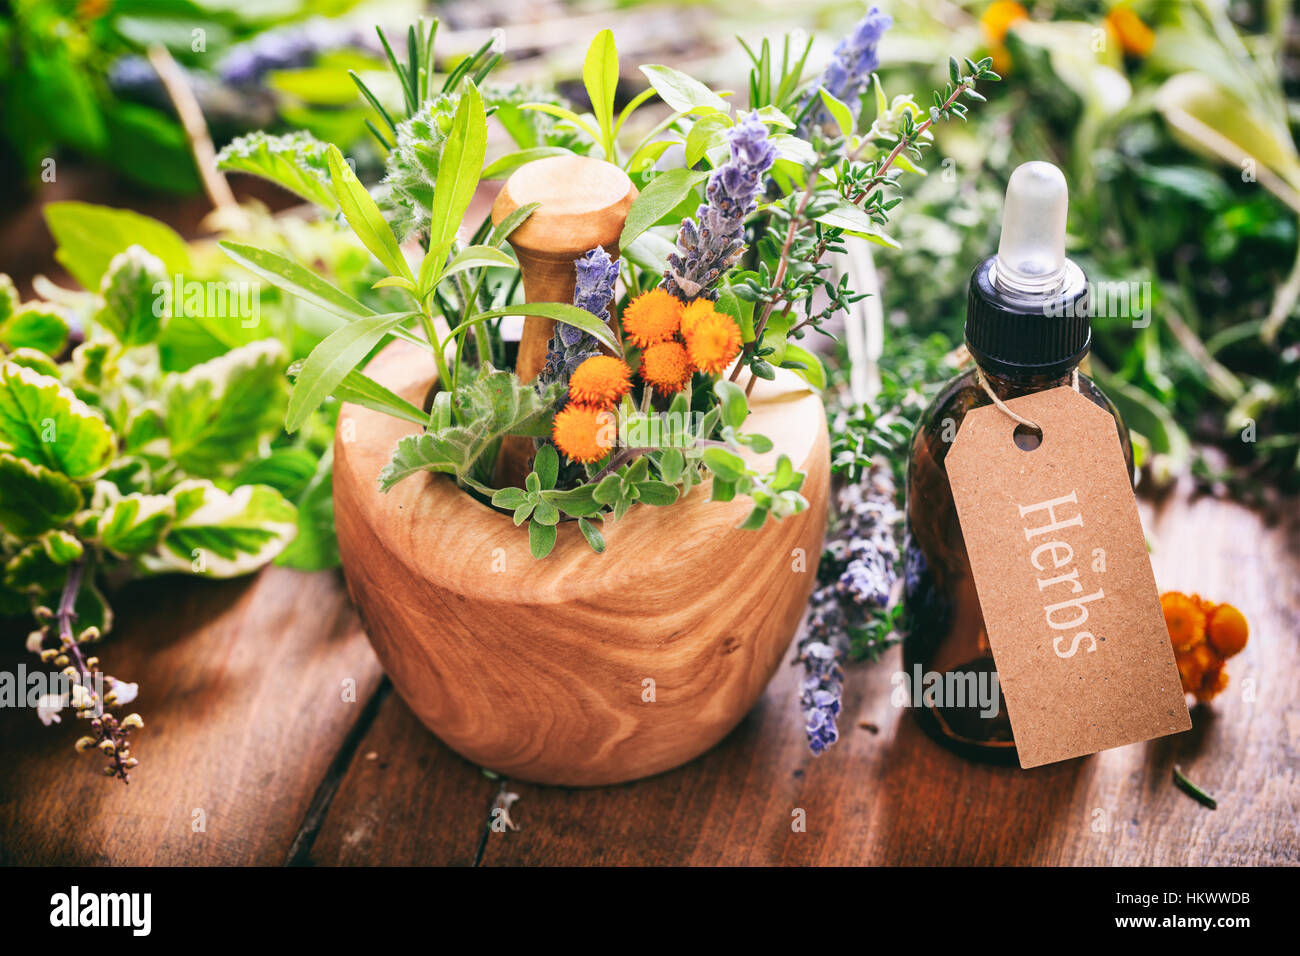 Herbs, essential oil and mortar on a wooden background Stock Photo